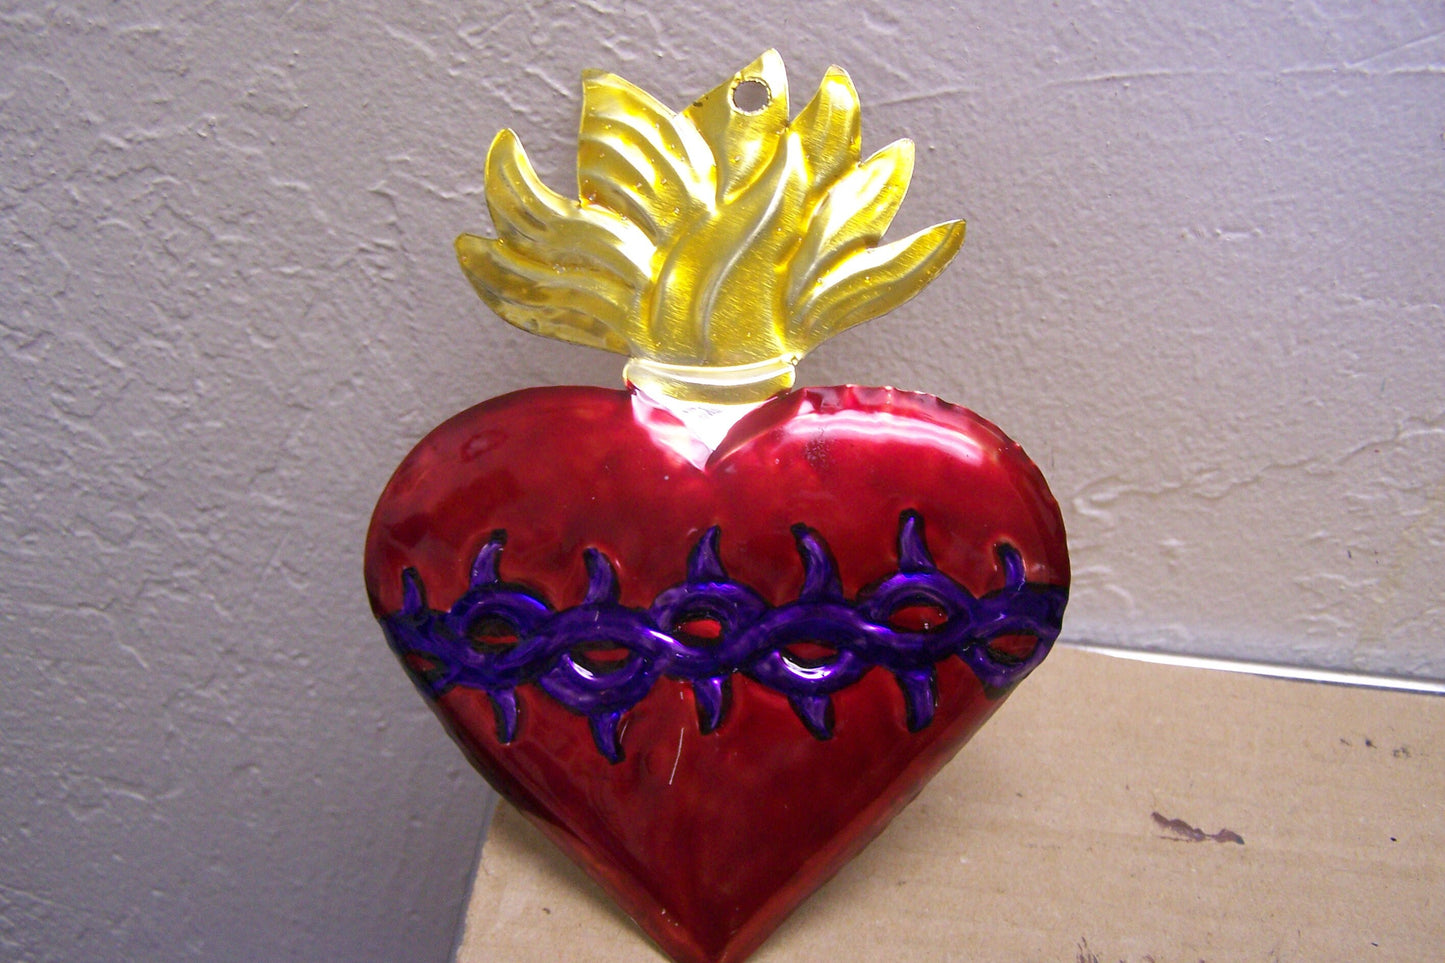 Painted Tin Sacred Heart Milagro Ex Voto - Flmed Heart with Thorns, Type II - Mexico